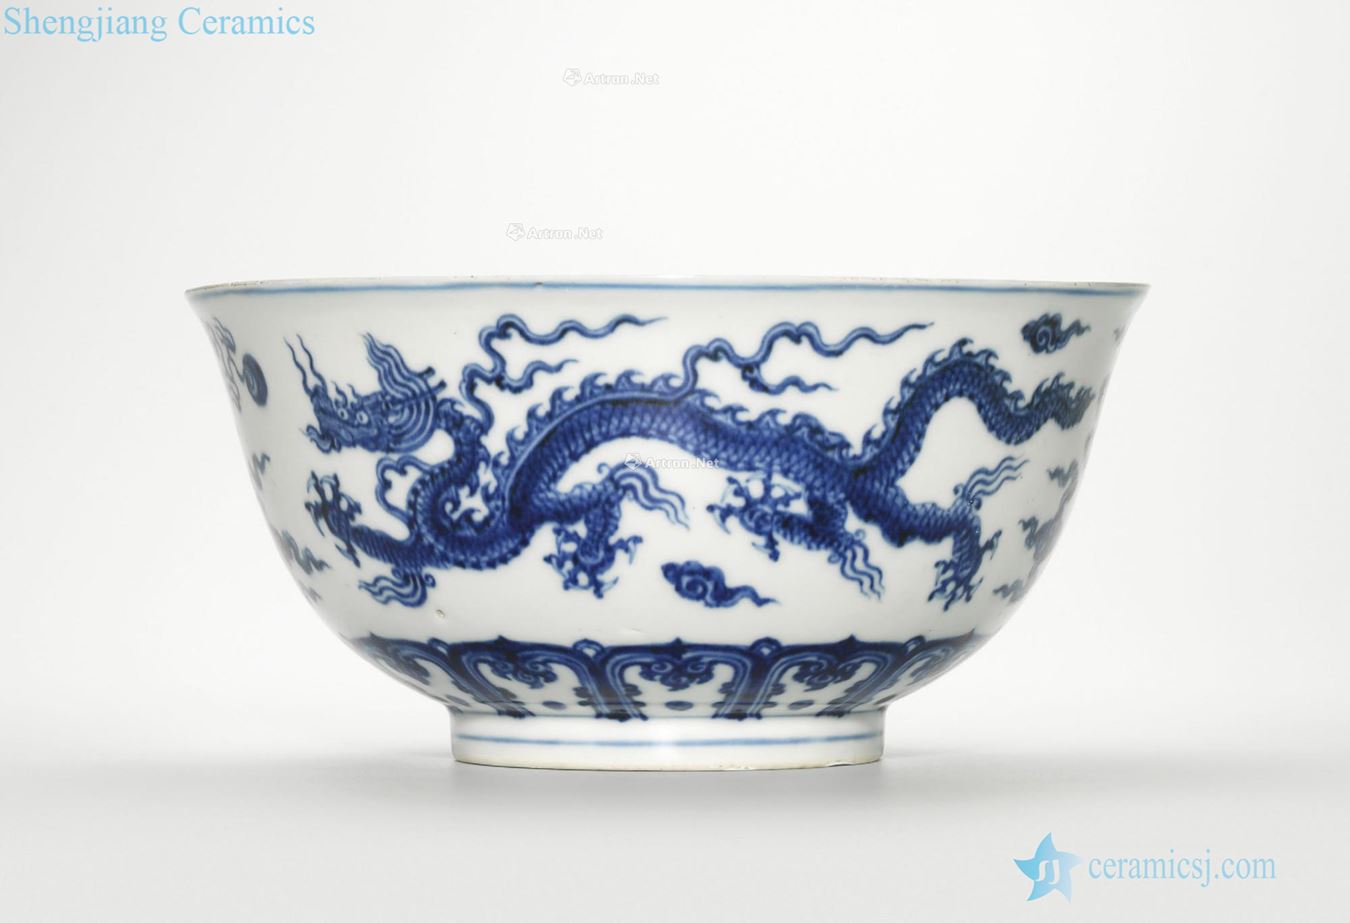 In the 18th century qing Blue and white dragon playing pearl grain 盌